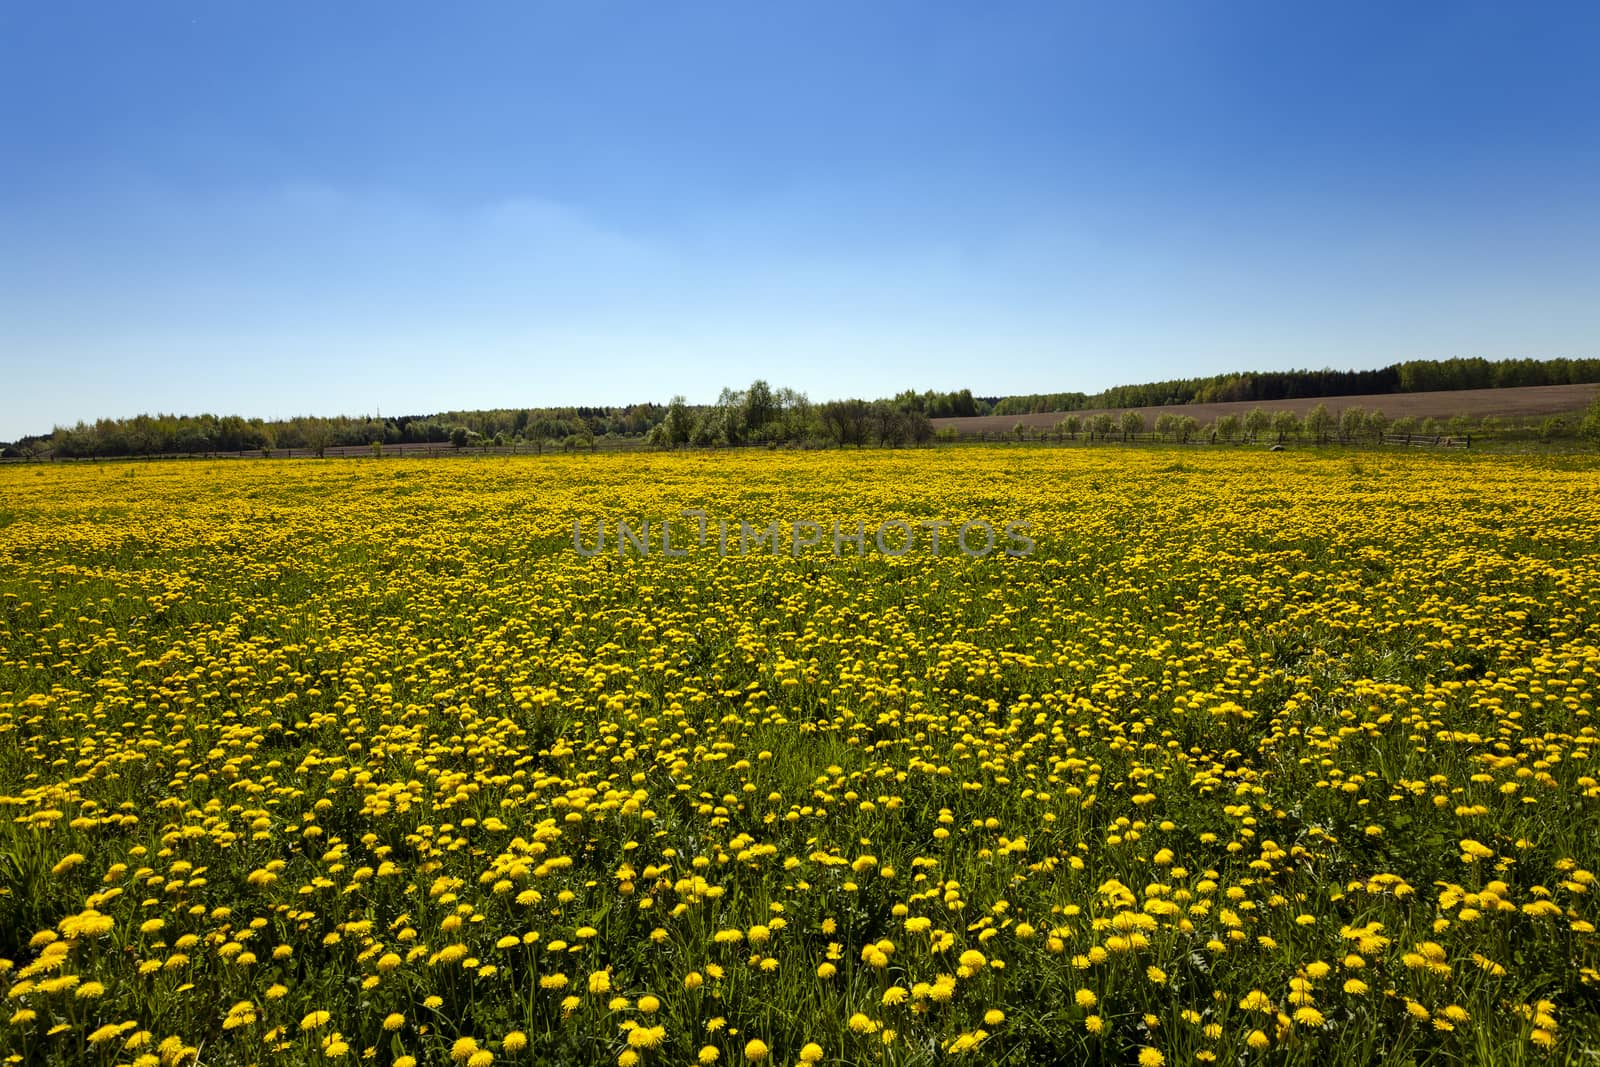   agriculture field where a large number of flowering dandelions. Blue sky.